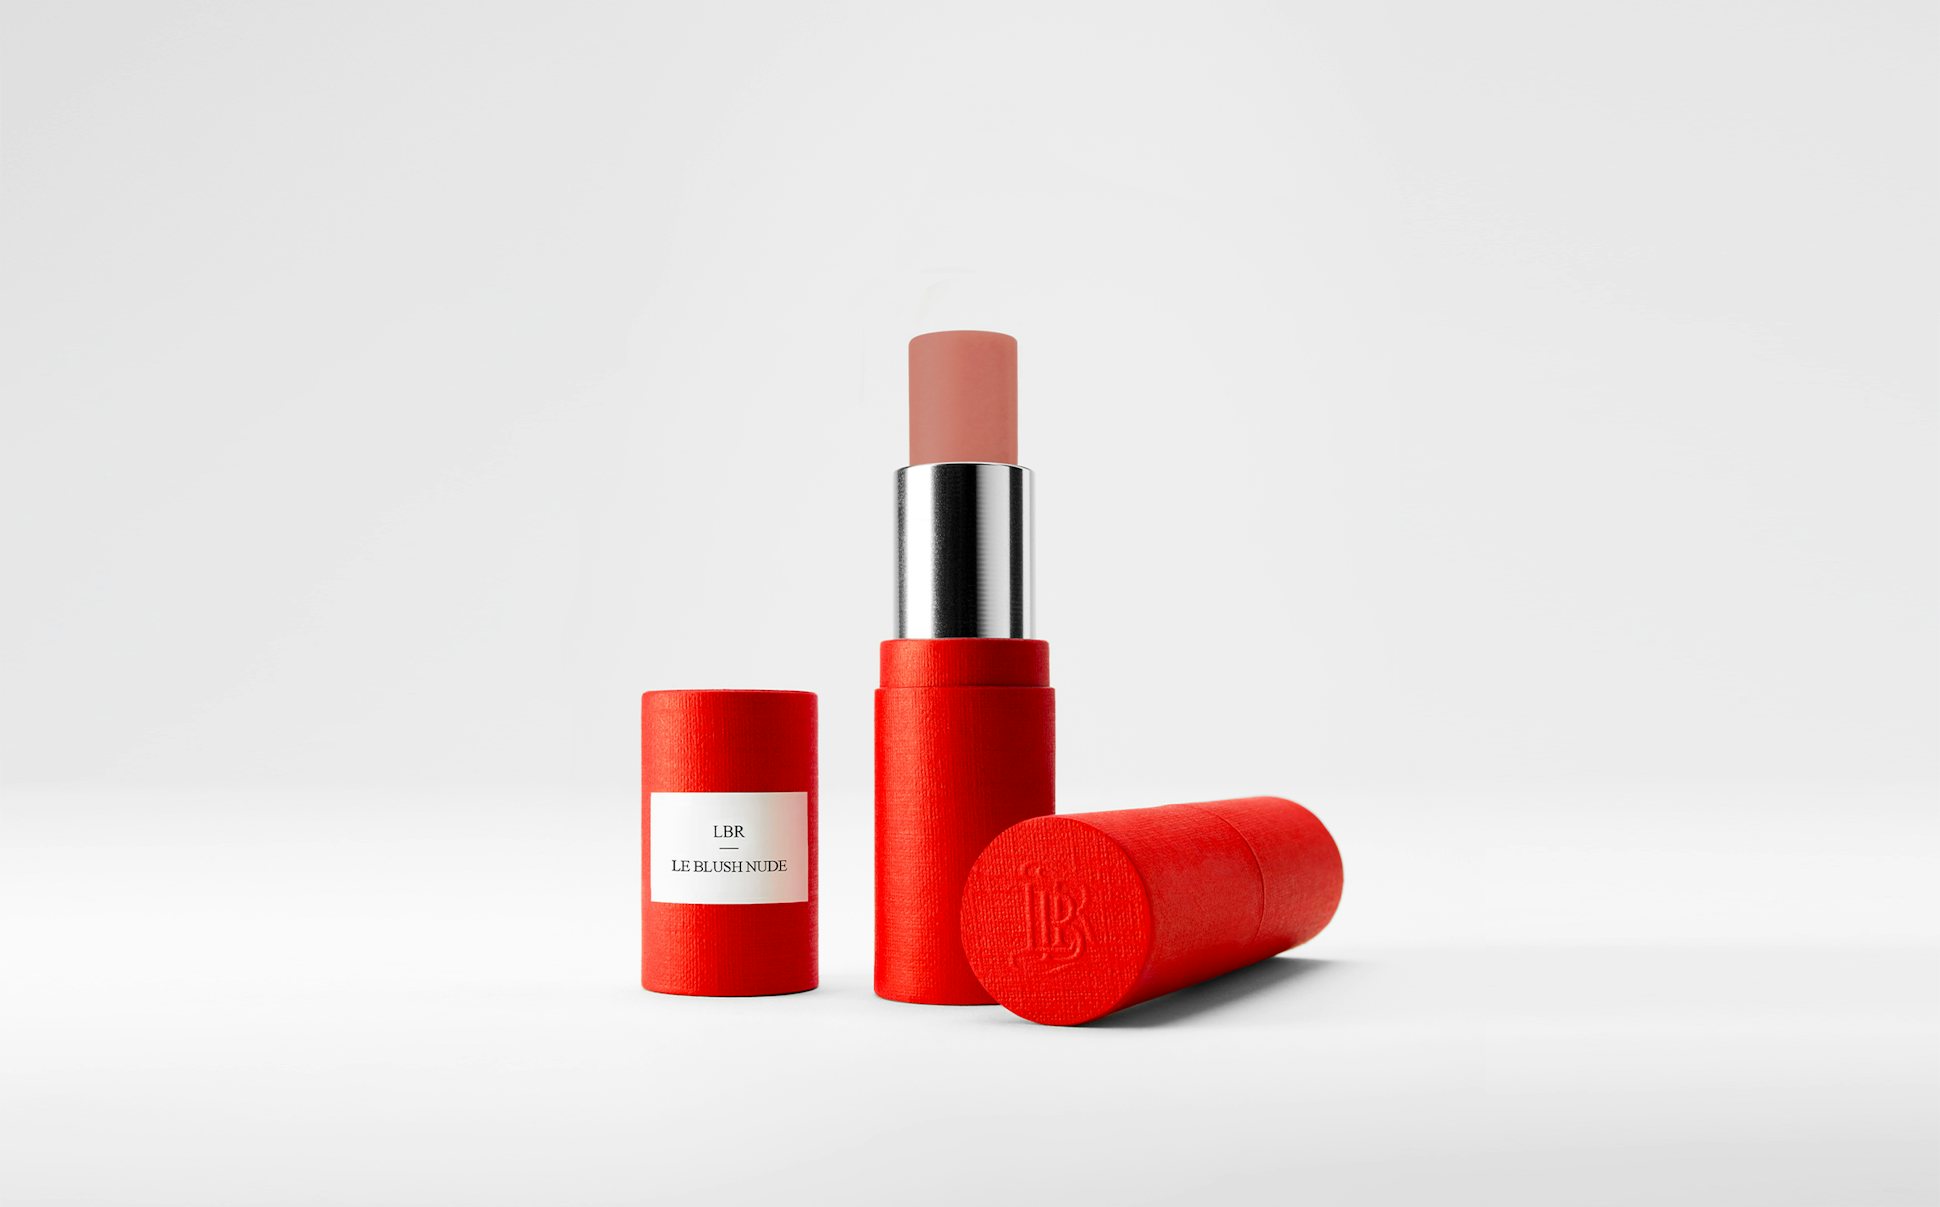 La bouche rouge The Nude Blush in the red paper case